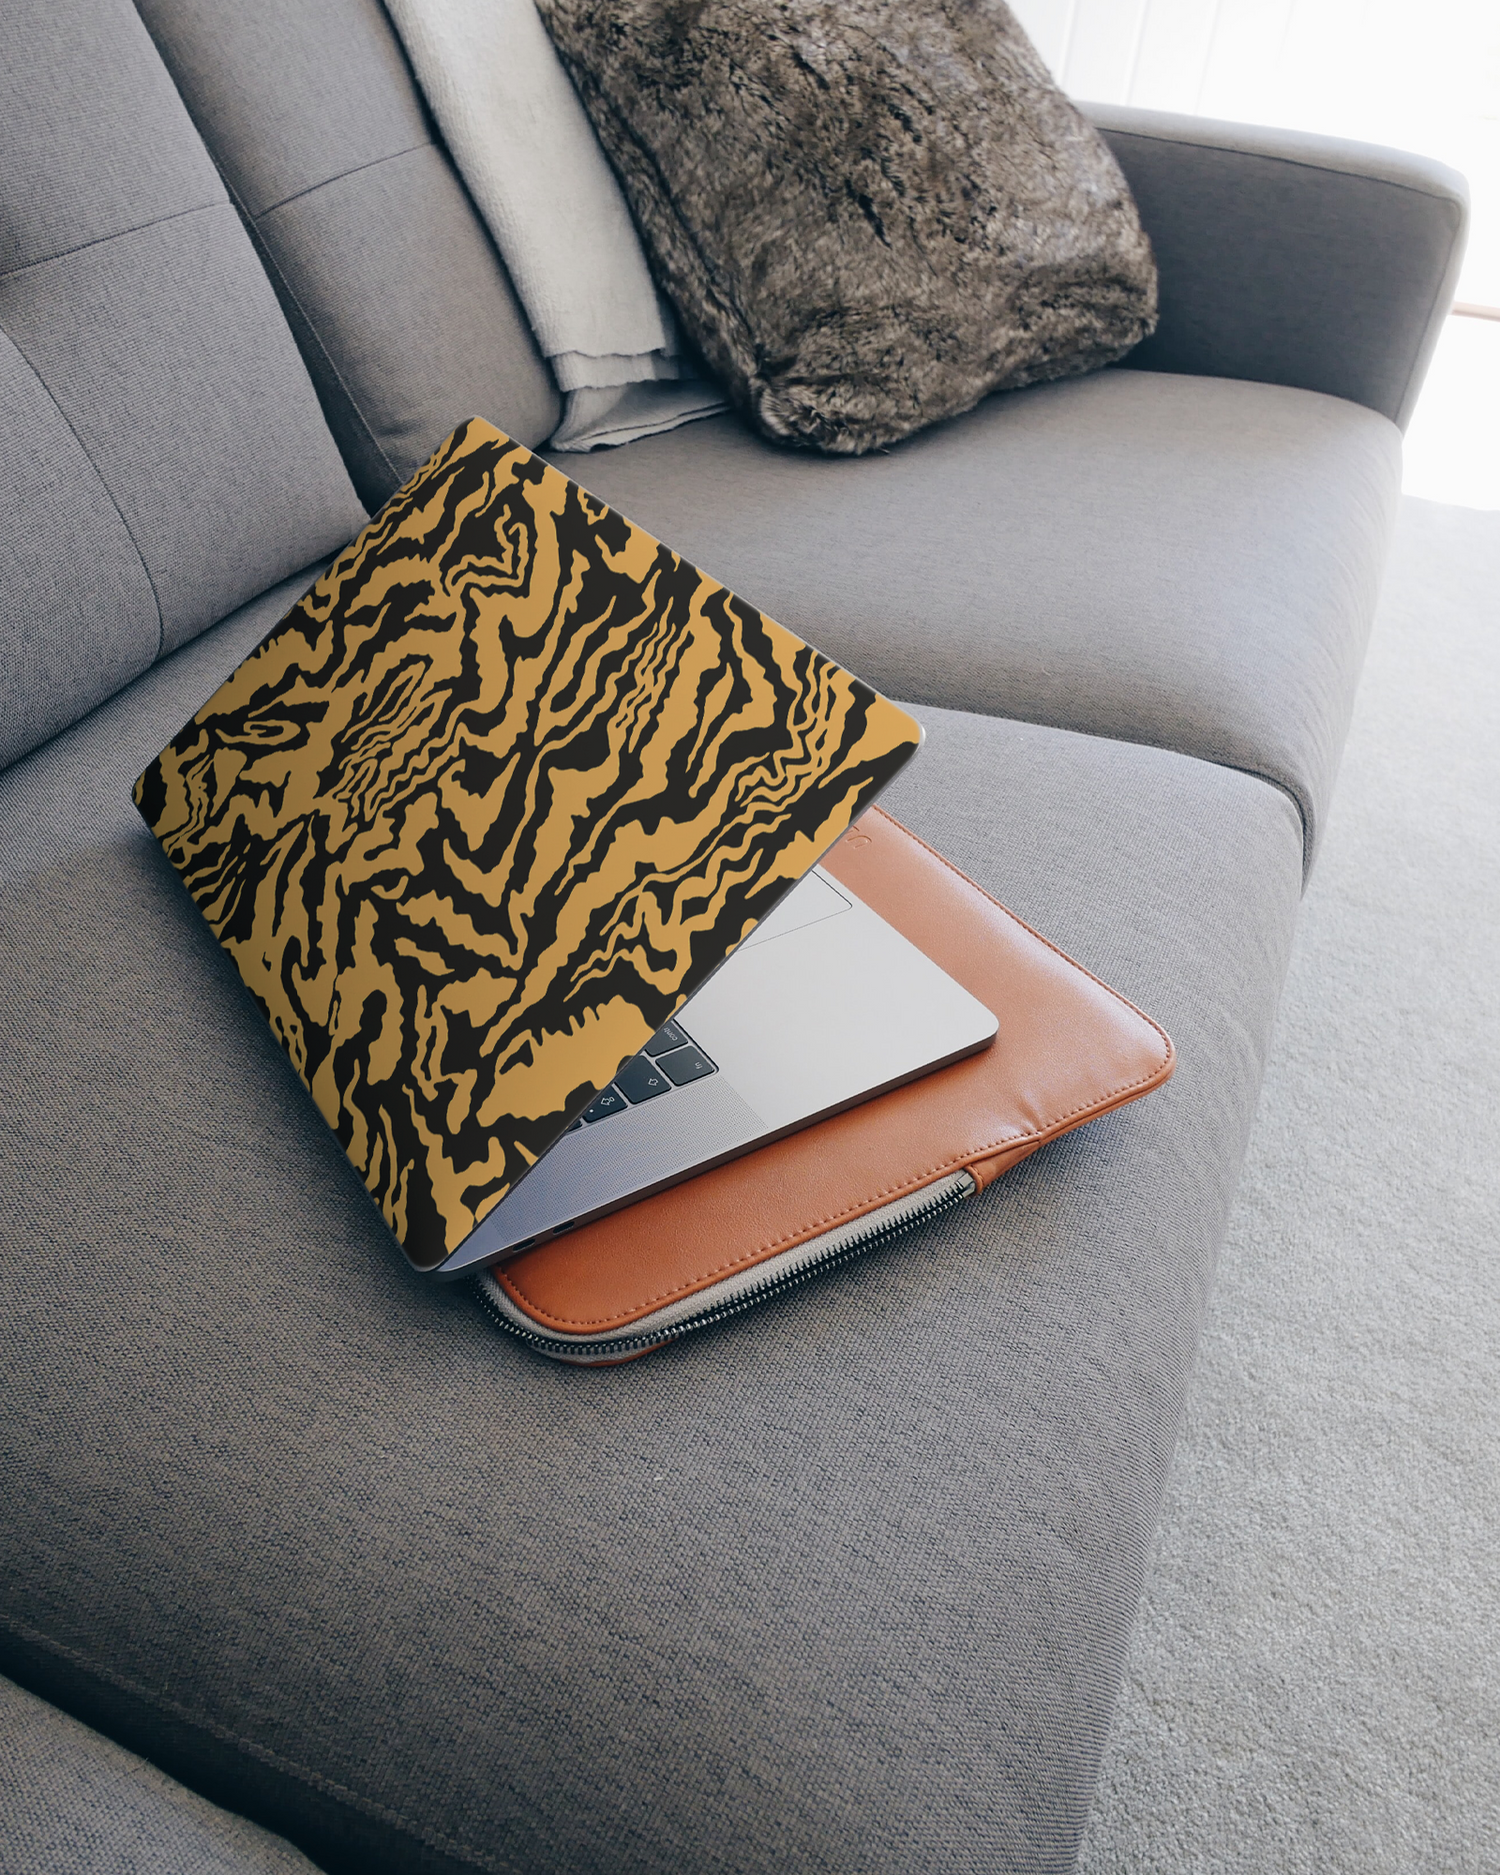 Warped Tiger Stripes Laptop Skin for 15 inch Apple MacBooks on a couch